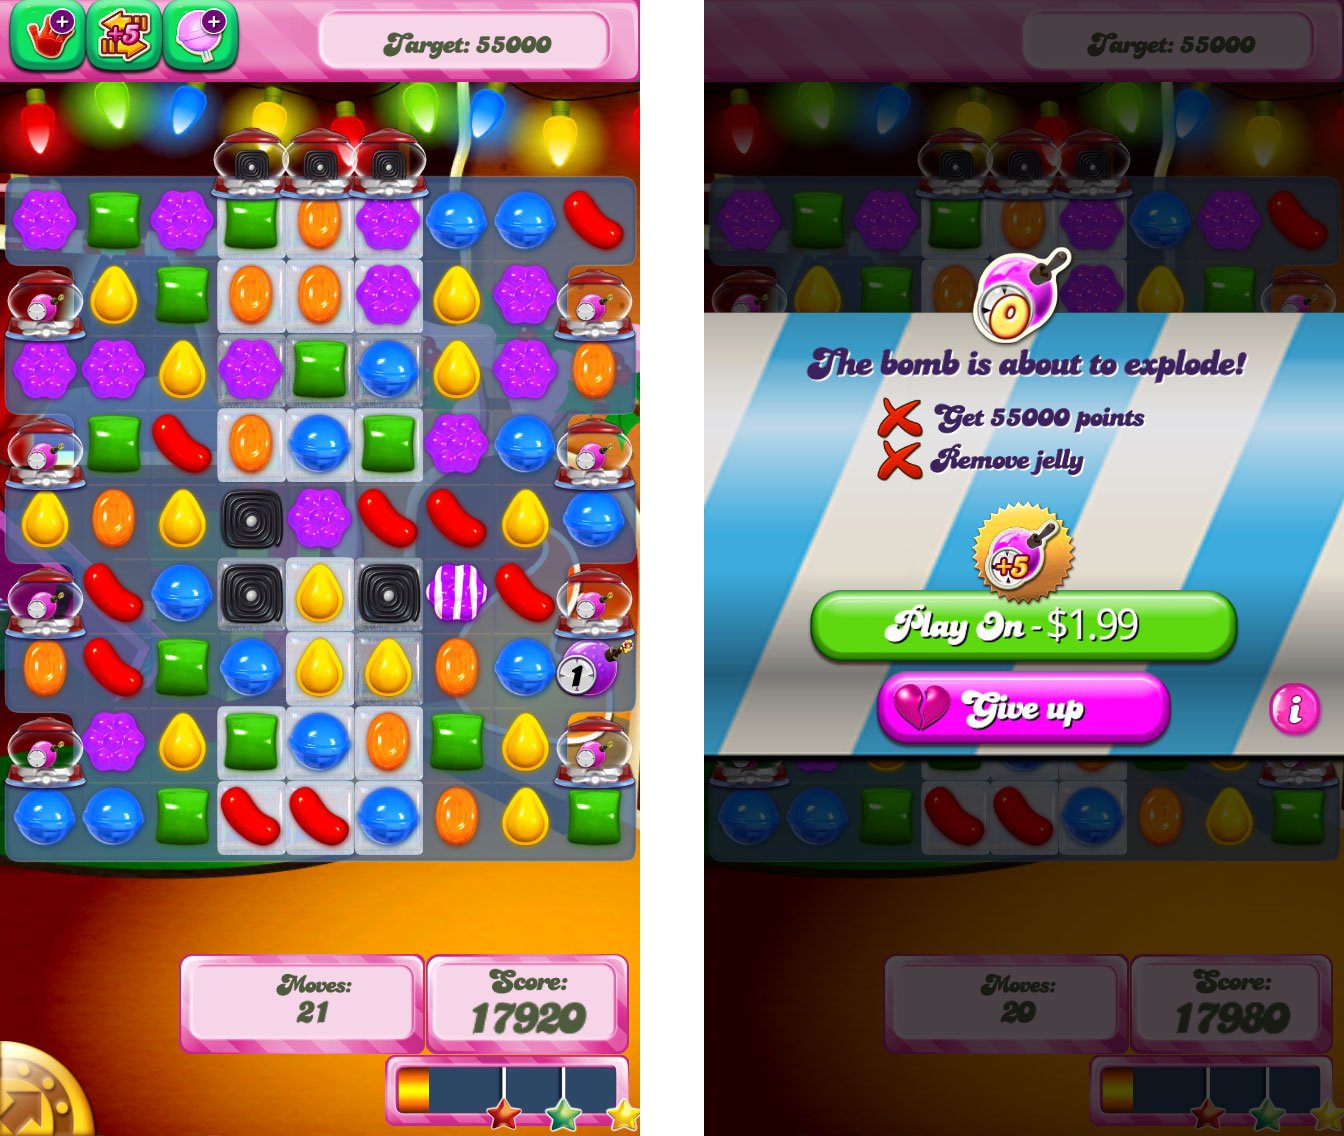 Candy Crush Saga: 10 more tips, hints, and cheats you need to know!